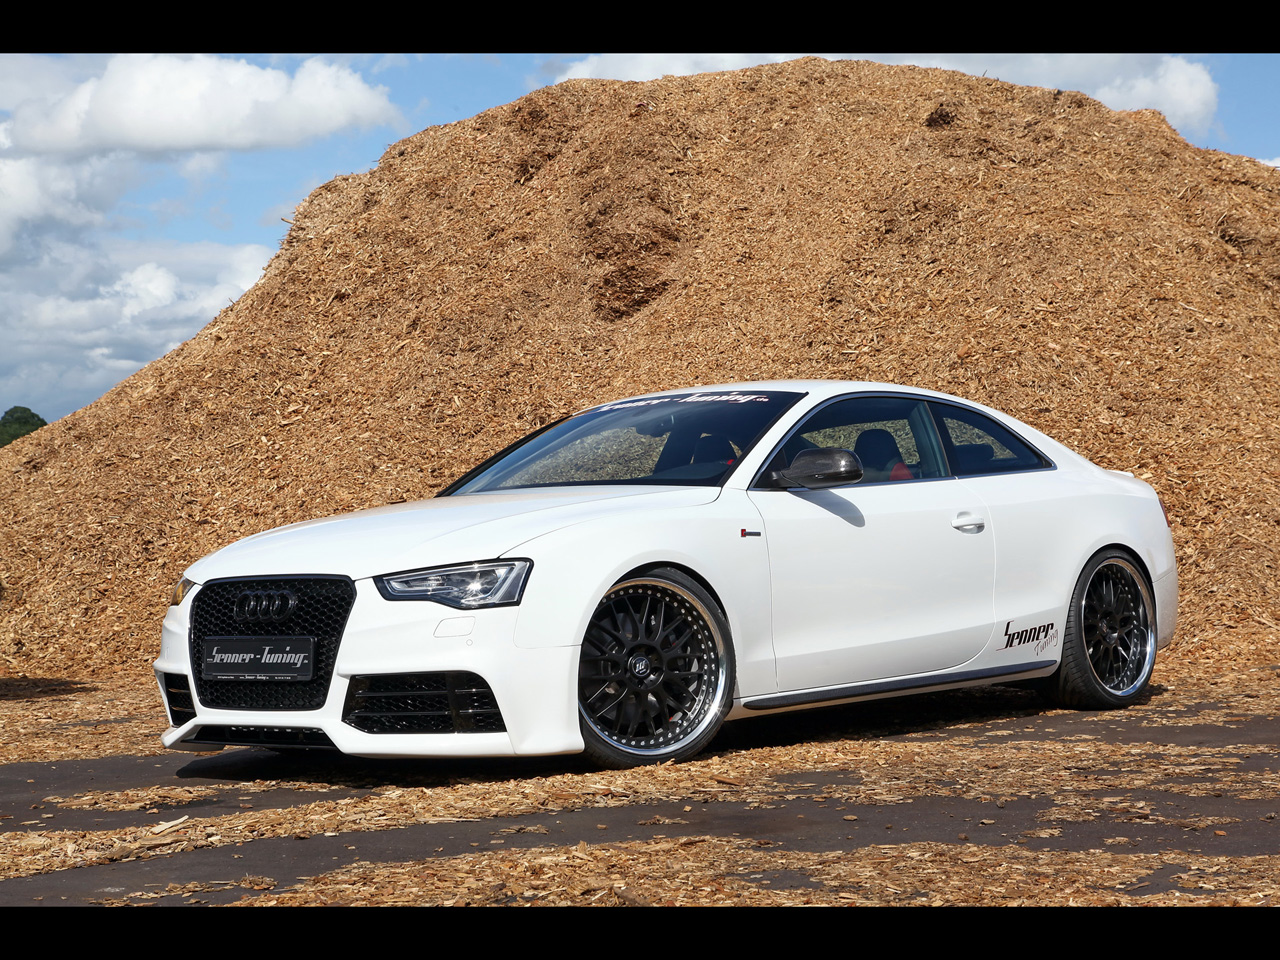 2012 Senner Tuning Audi S5 Coupe